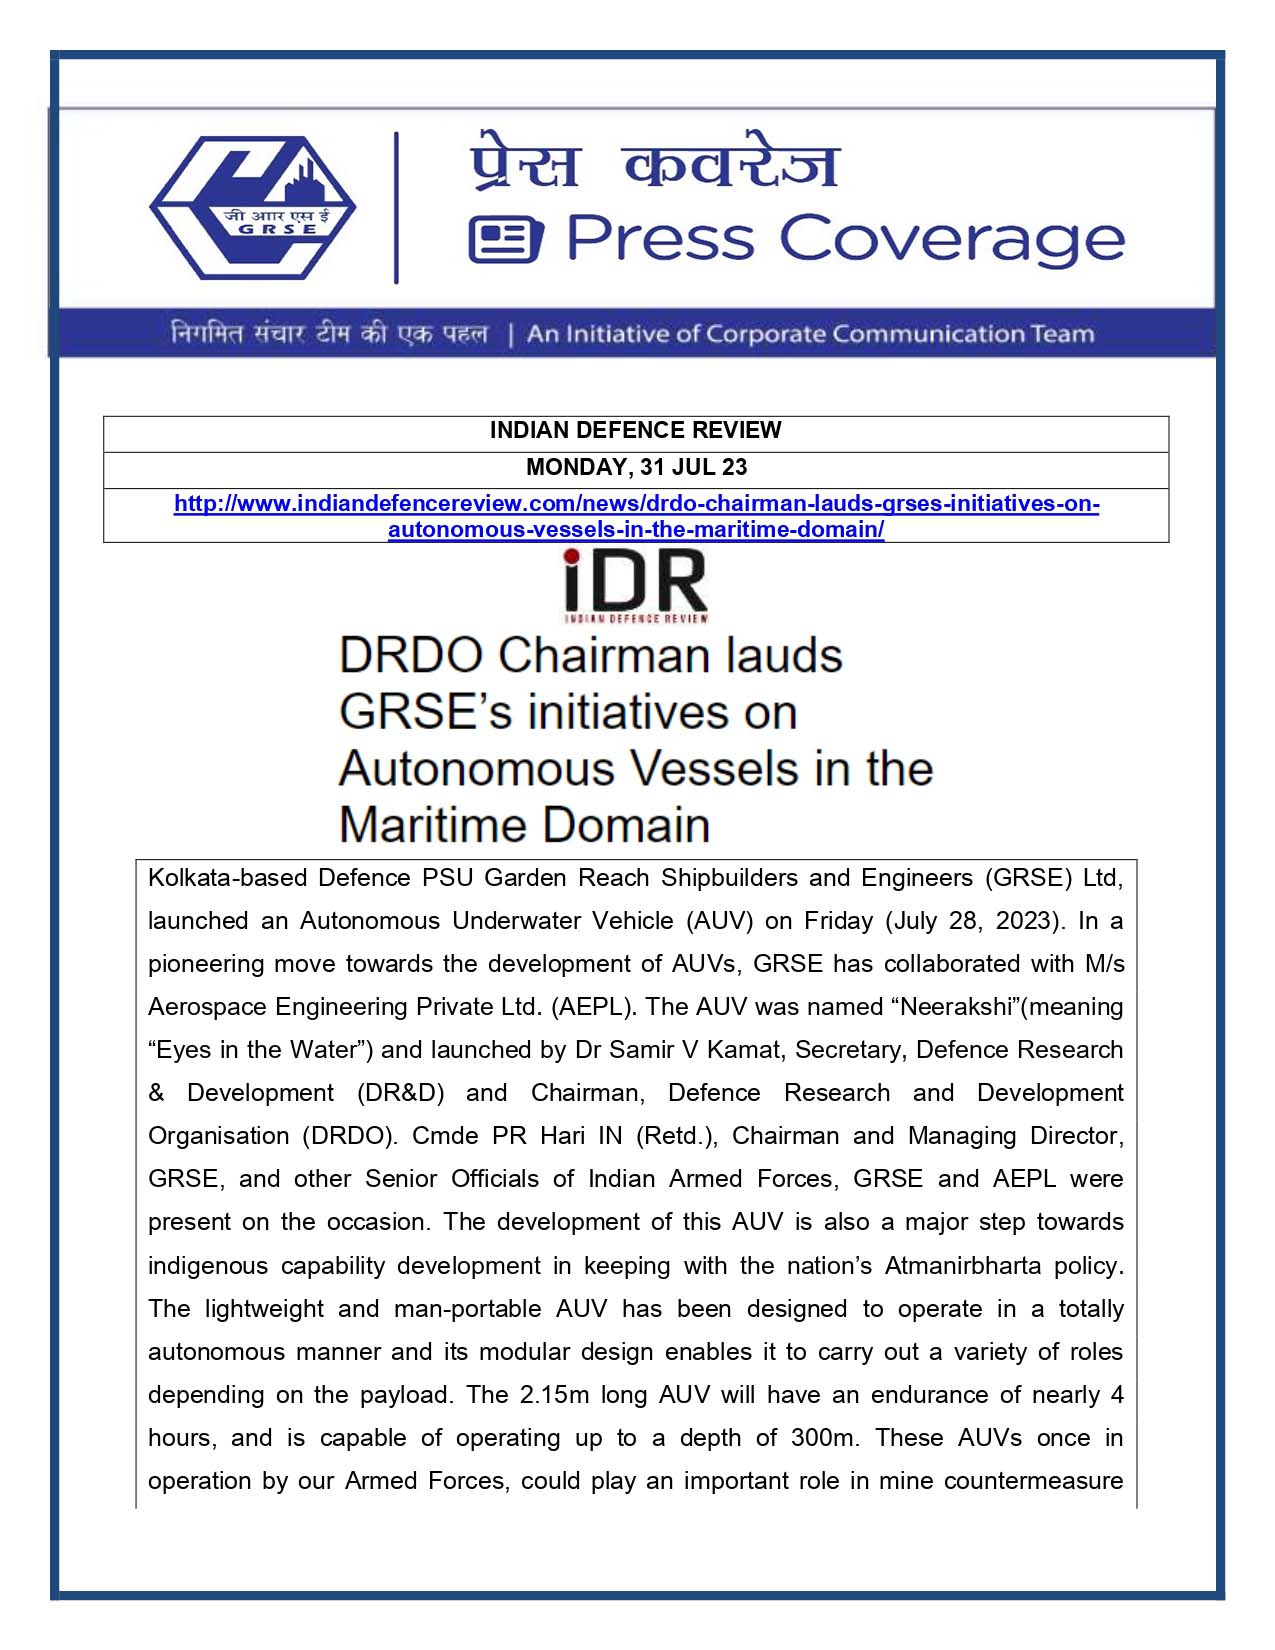 Press Coverage : Indian Defence Review, 31 Jul 23 : DRDO Chairman lauds GRSE's initiative on Autonomous Vessels in the Maritime Domain